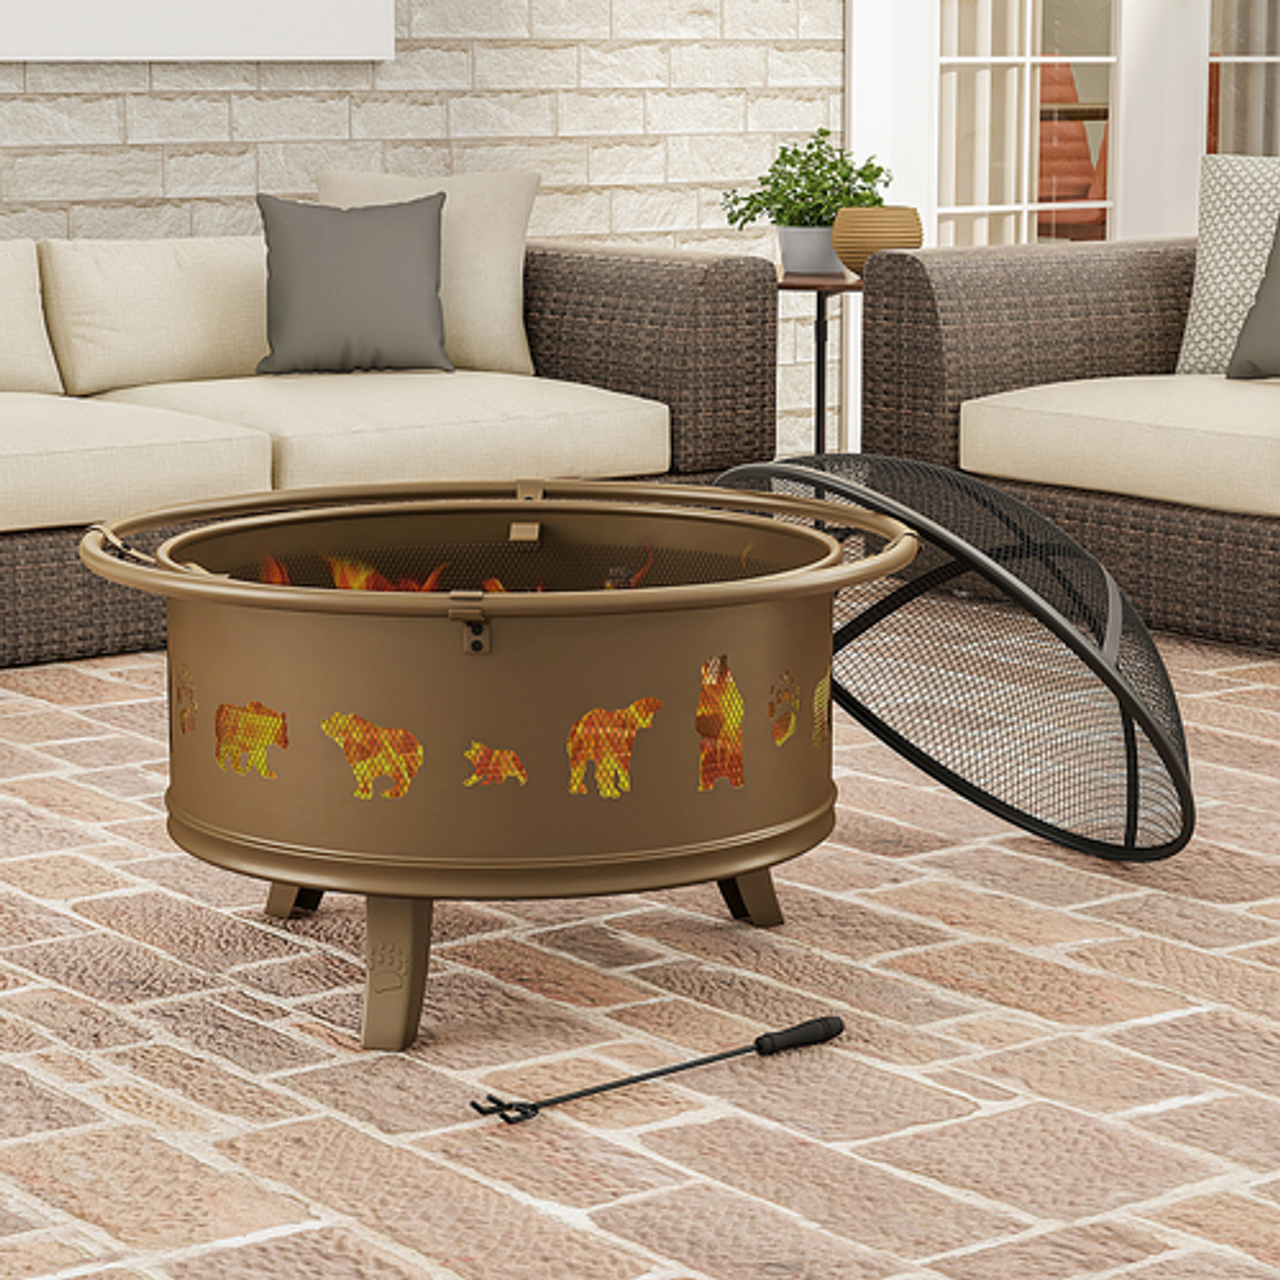 Nature Spring - 32" Fire Pit – Round Outdoor Fireplace with Steel Bowl, Bear Cutouts for Patio Wood Burning - Antique Gold